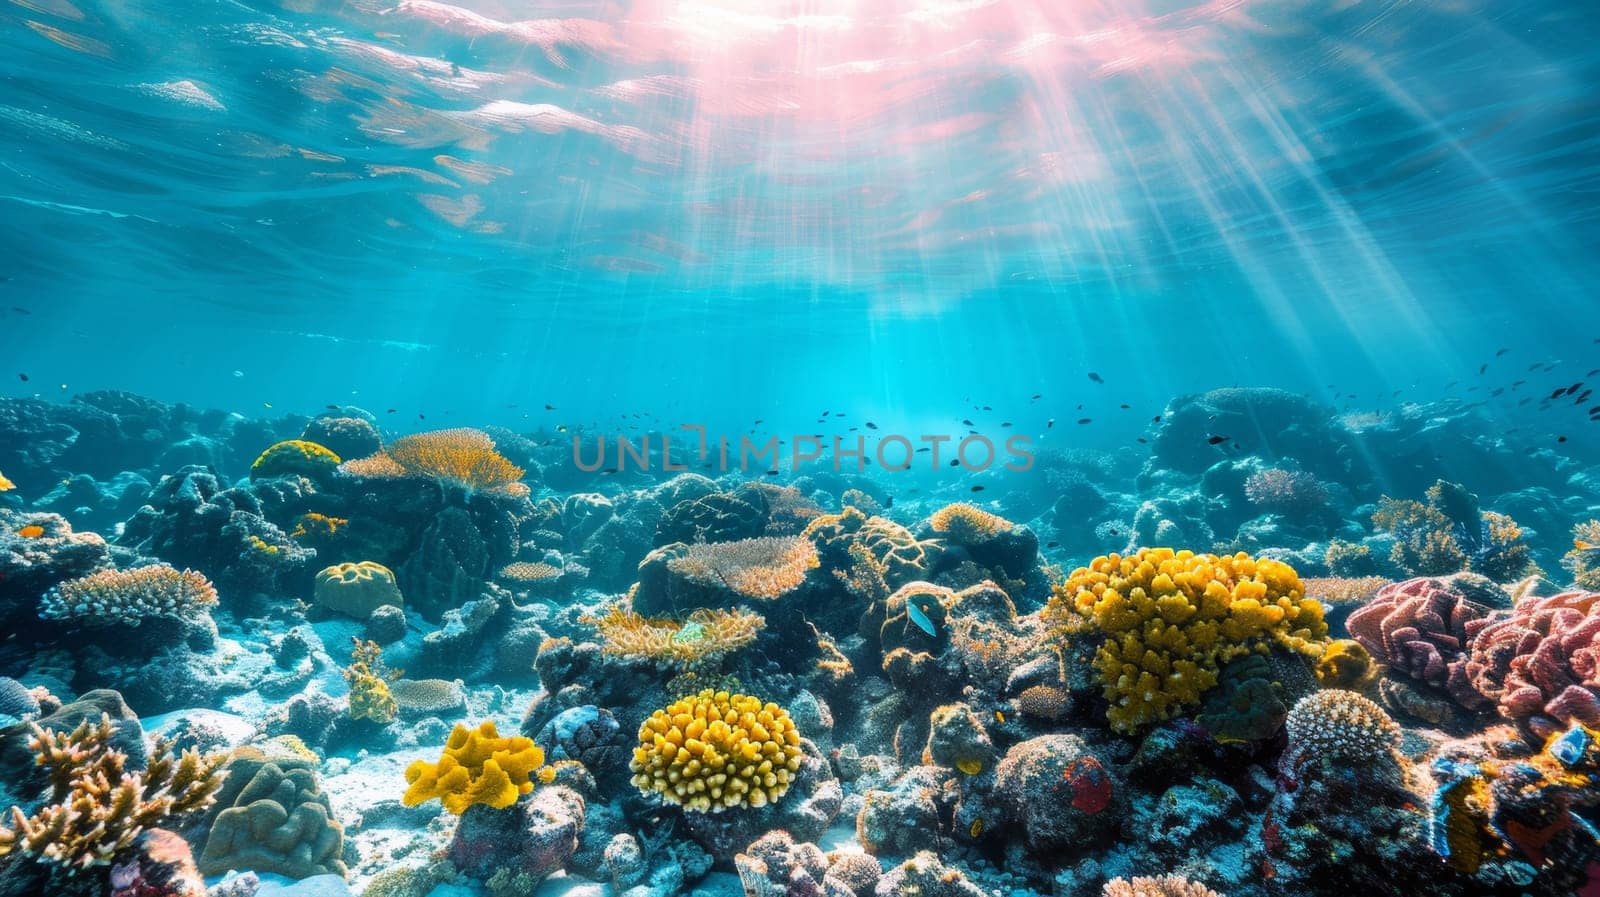 A beautiful underwater scene of a coral reef with sunlight shining through